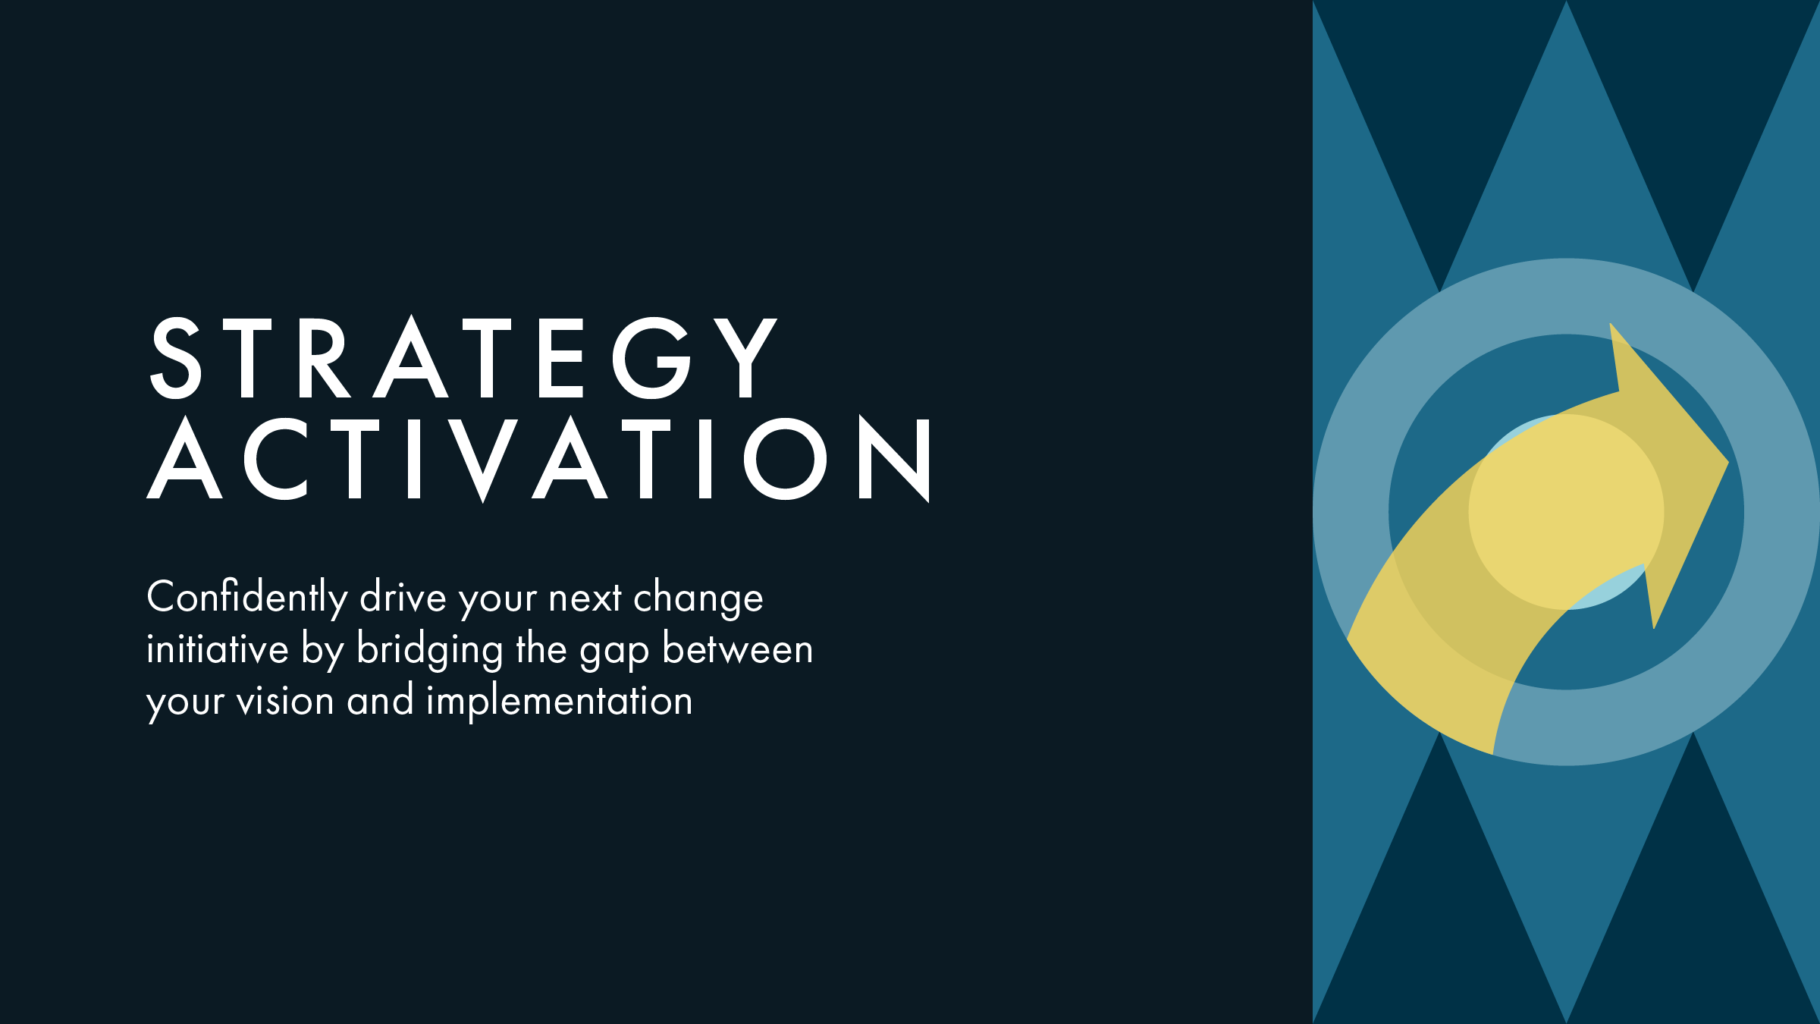 Header reads “Strategy Activation” in white text. Subhead reads “Confidently drive your next change initiative by bridging the gap between your vision and implementation.” An icon of a yellow arrow sits on top of a blue circle.